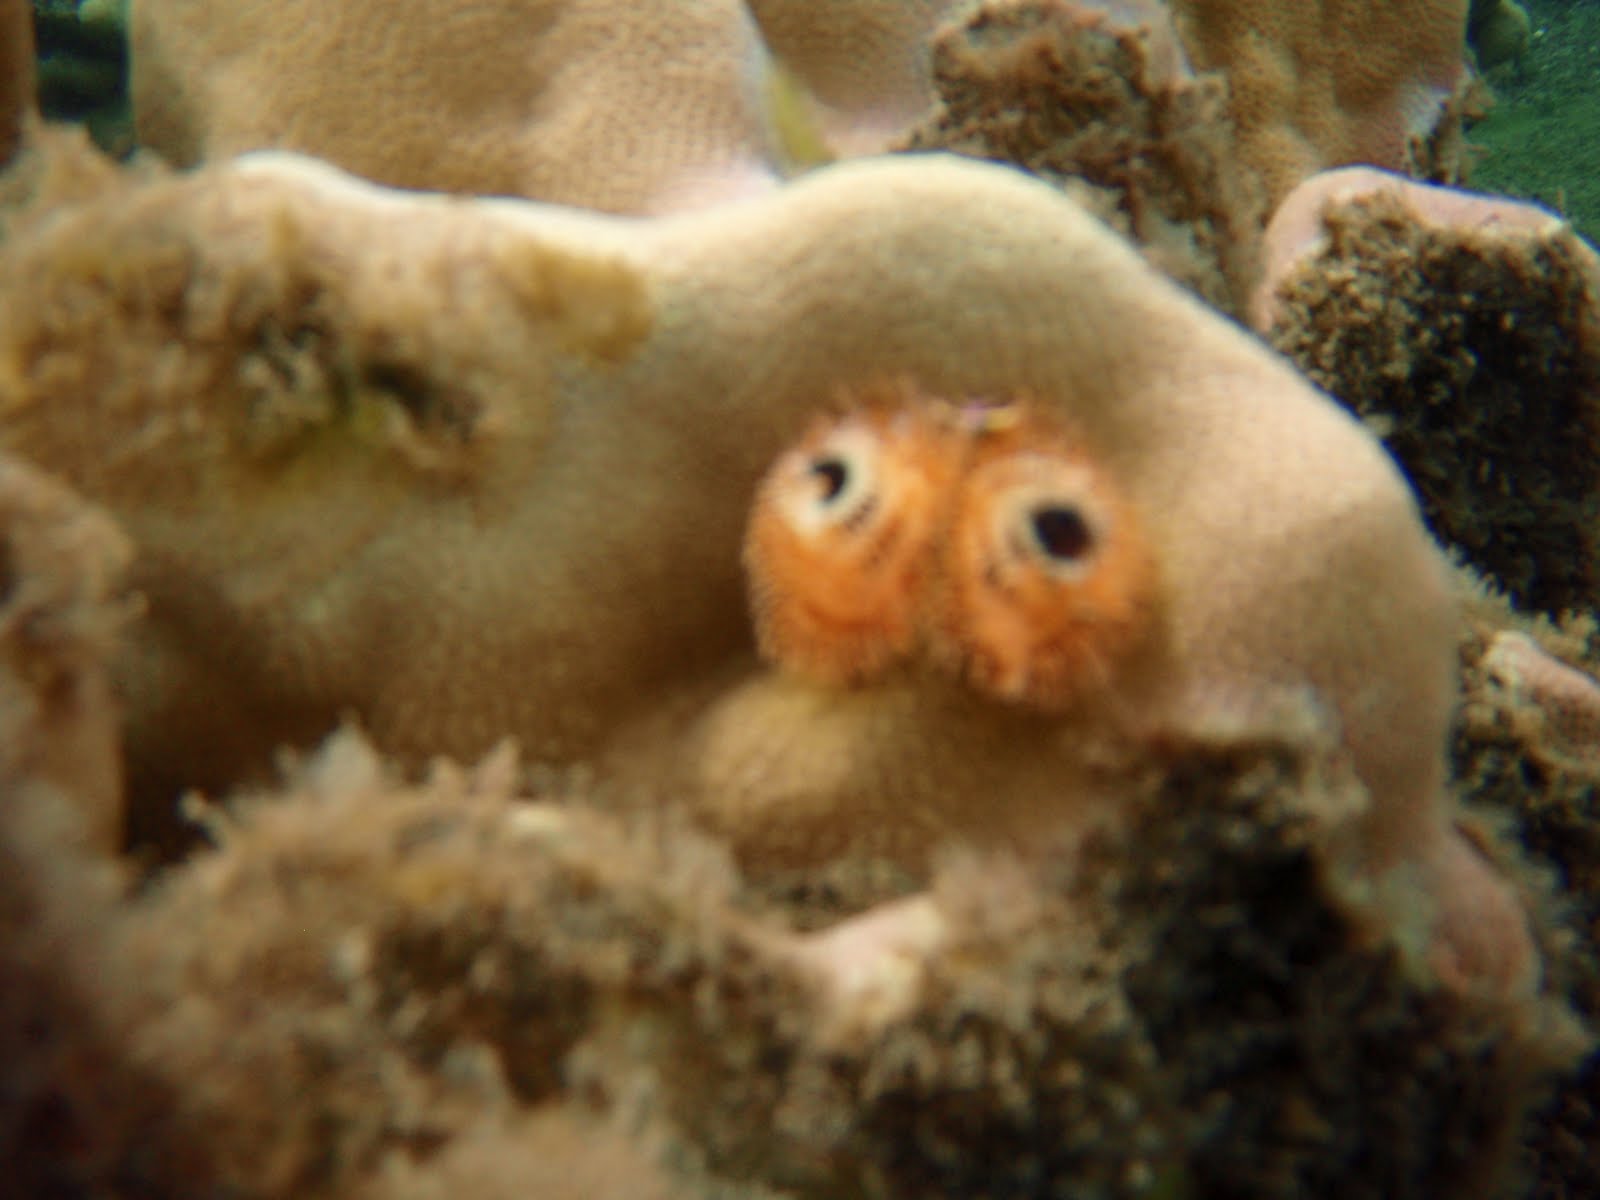 Blurry picture of yellow/orange christmas tree worms coming out of coral